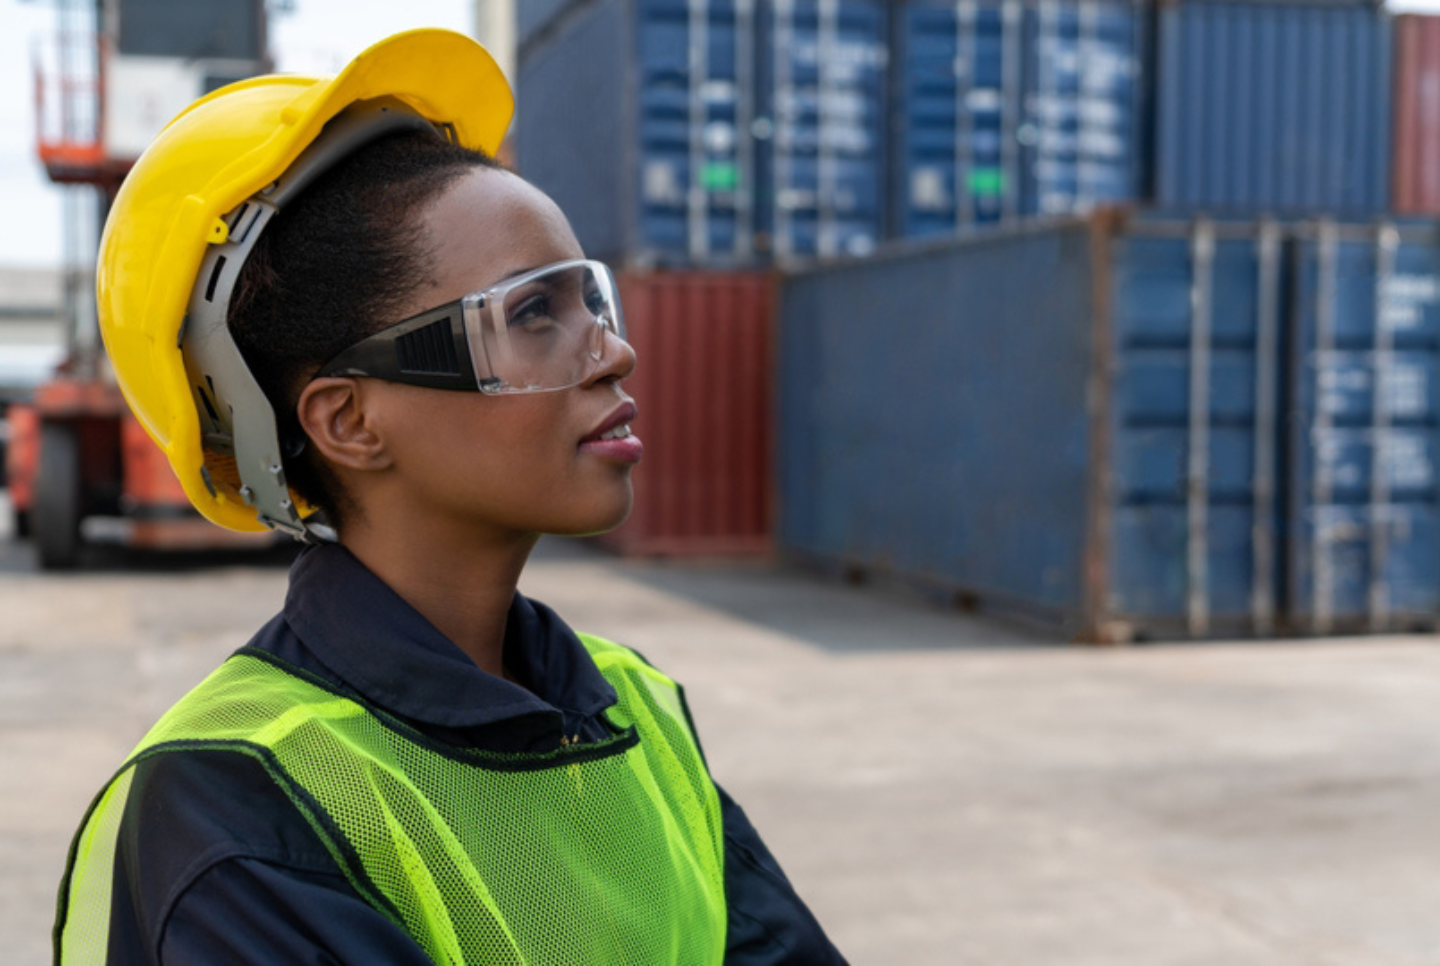 Woman standing in shipyard with hardhat and goggles. women comprise 41% of the supply chain workforce in 2021, up slightly from 39% in 2020